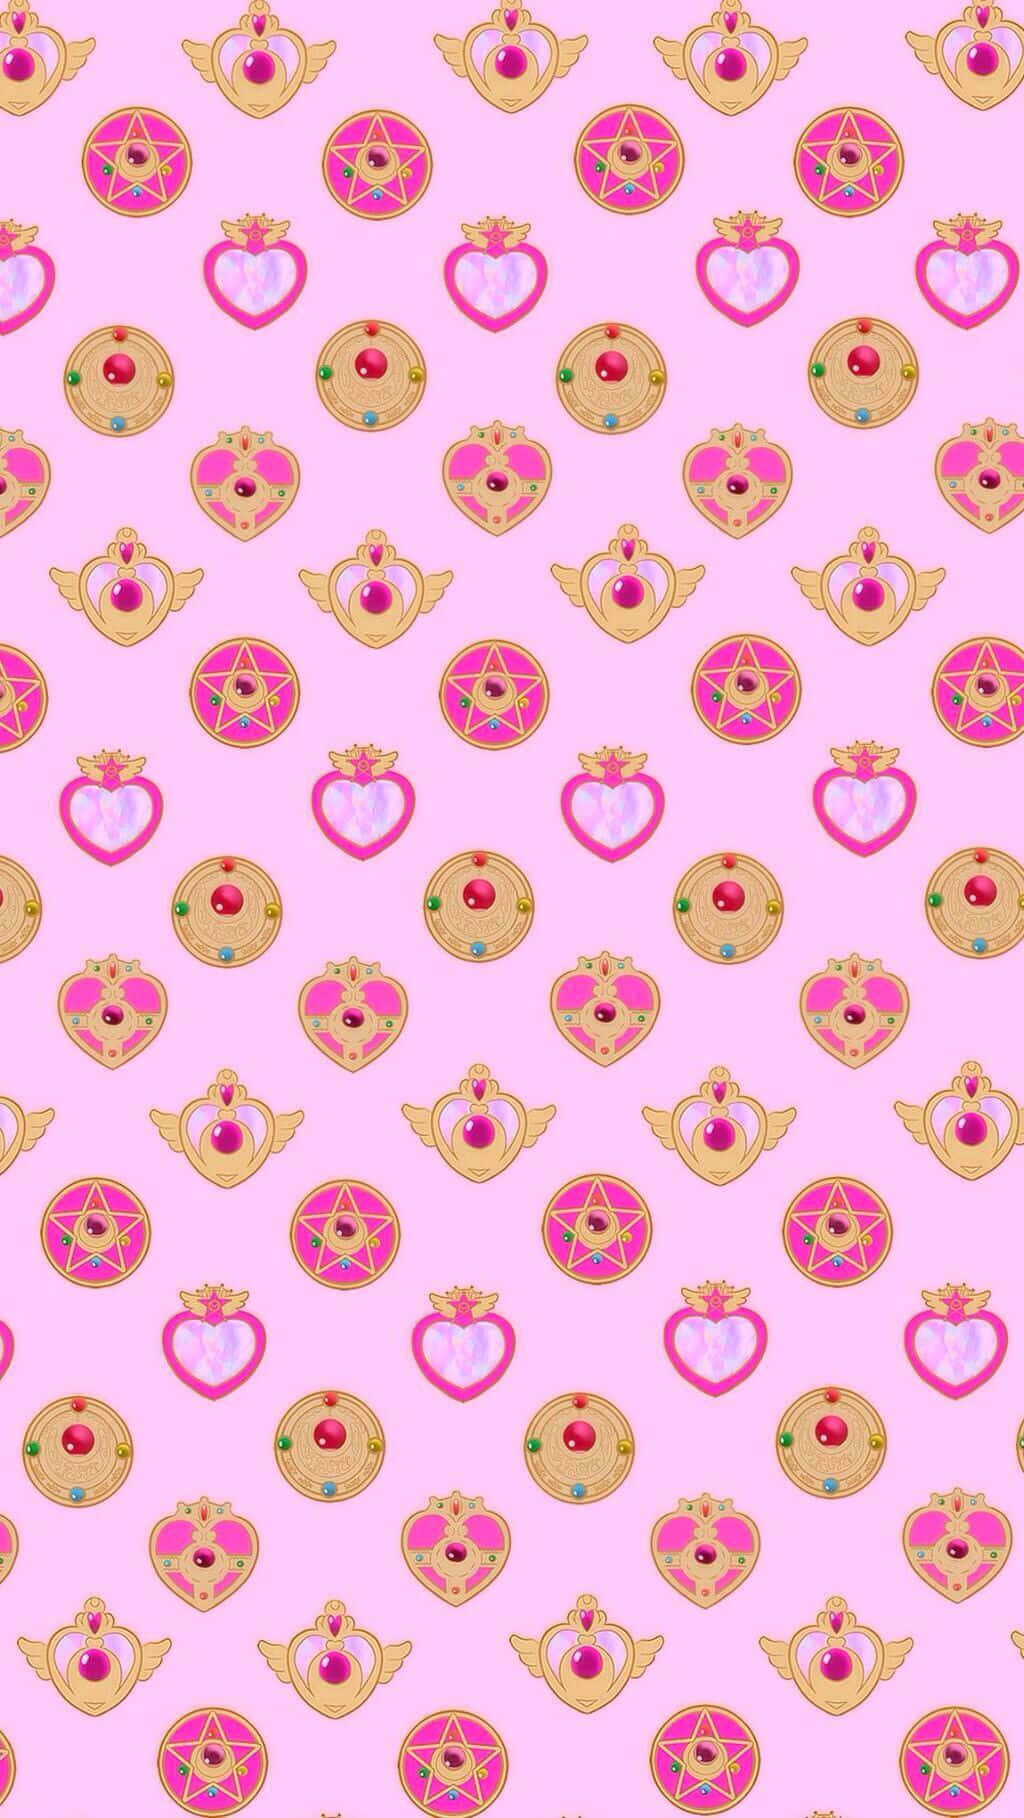 Adorable Sailor Moon Pattern to Brighten Your Day Wallpaper